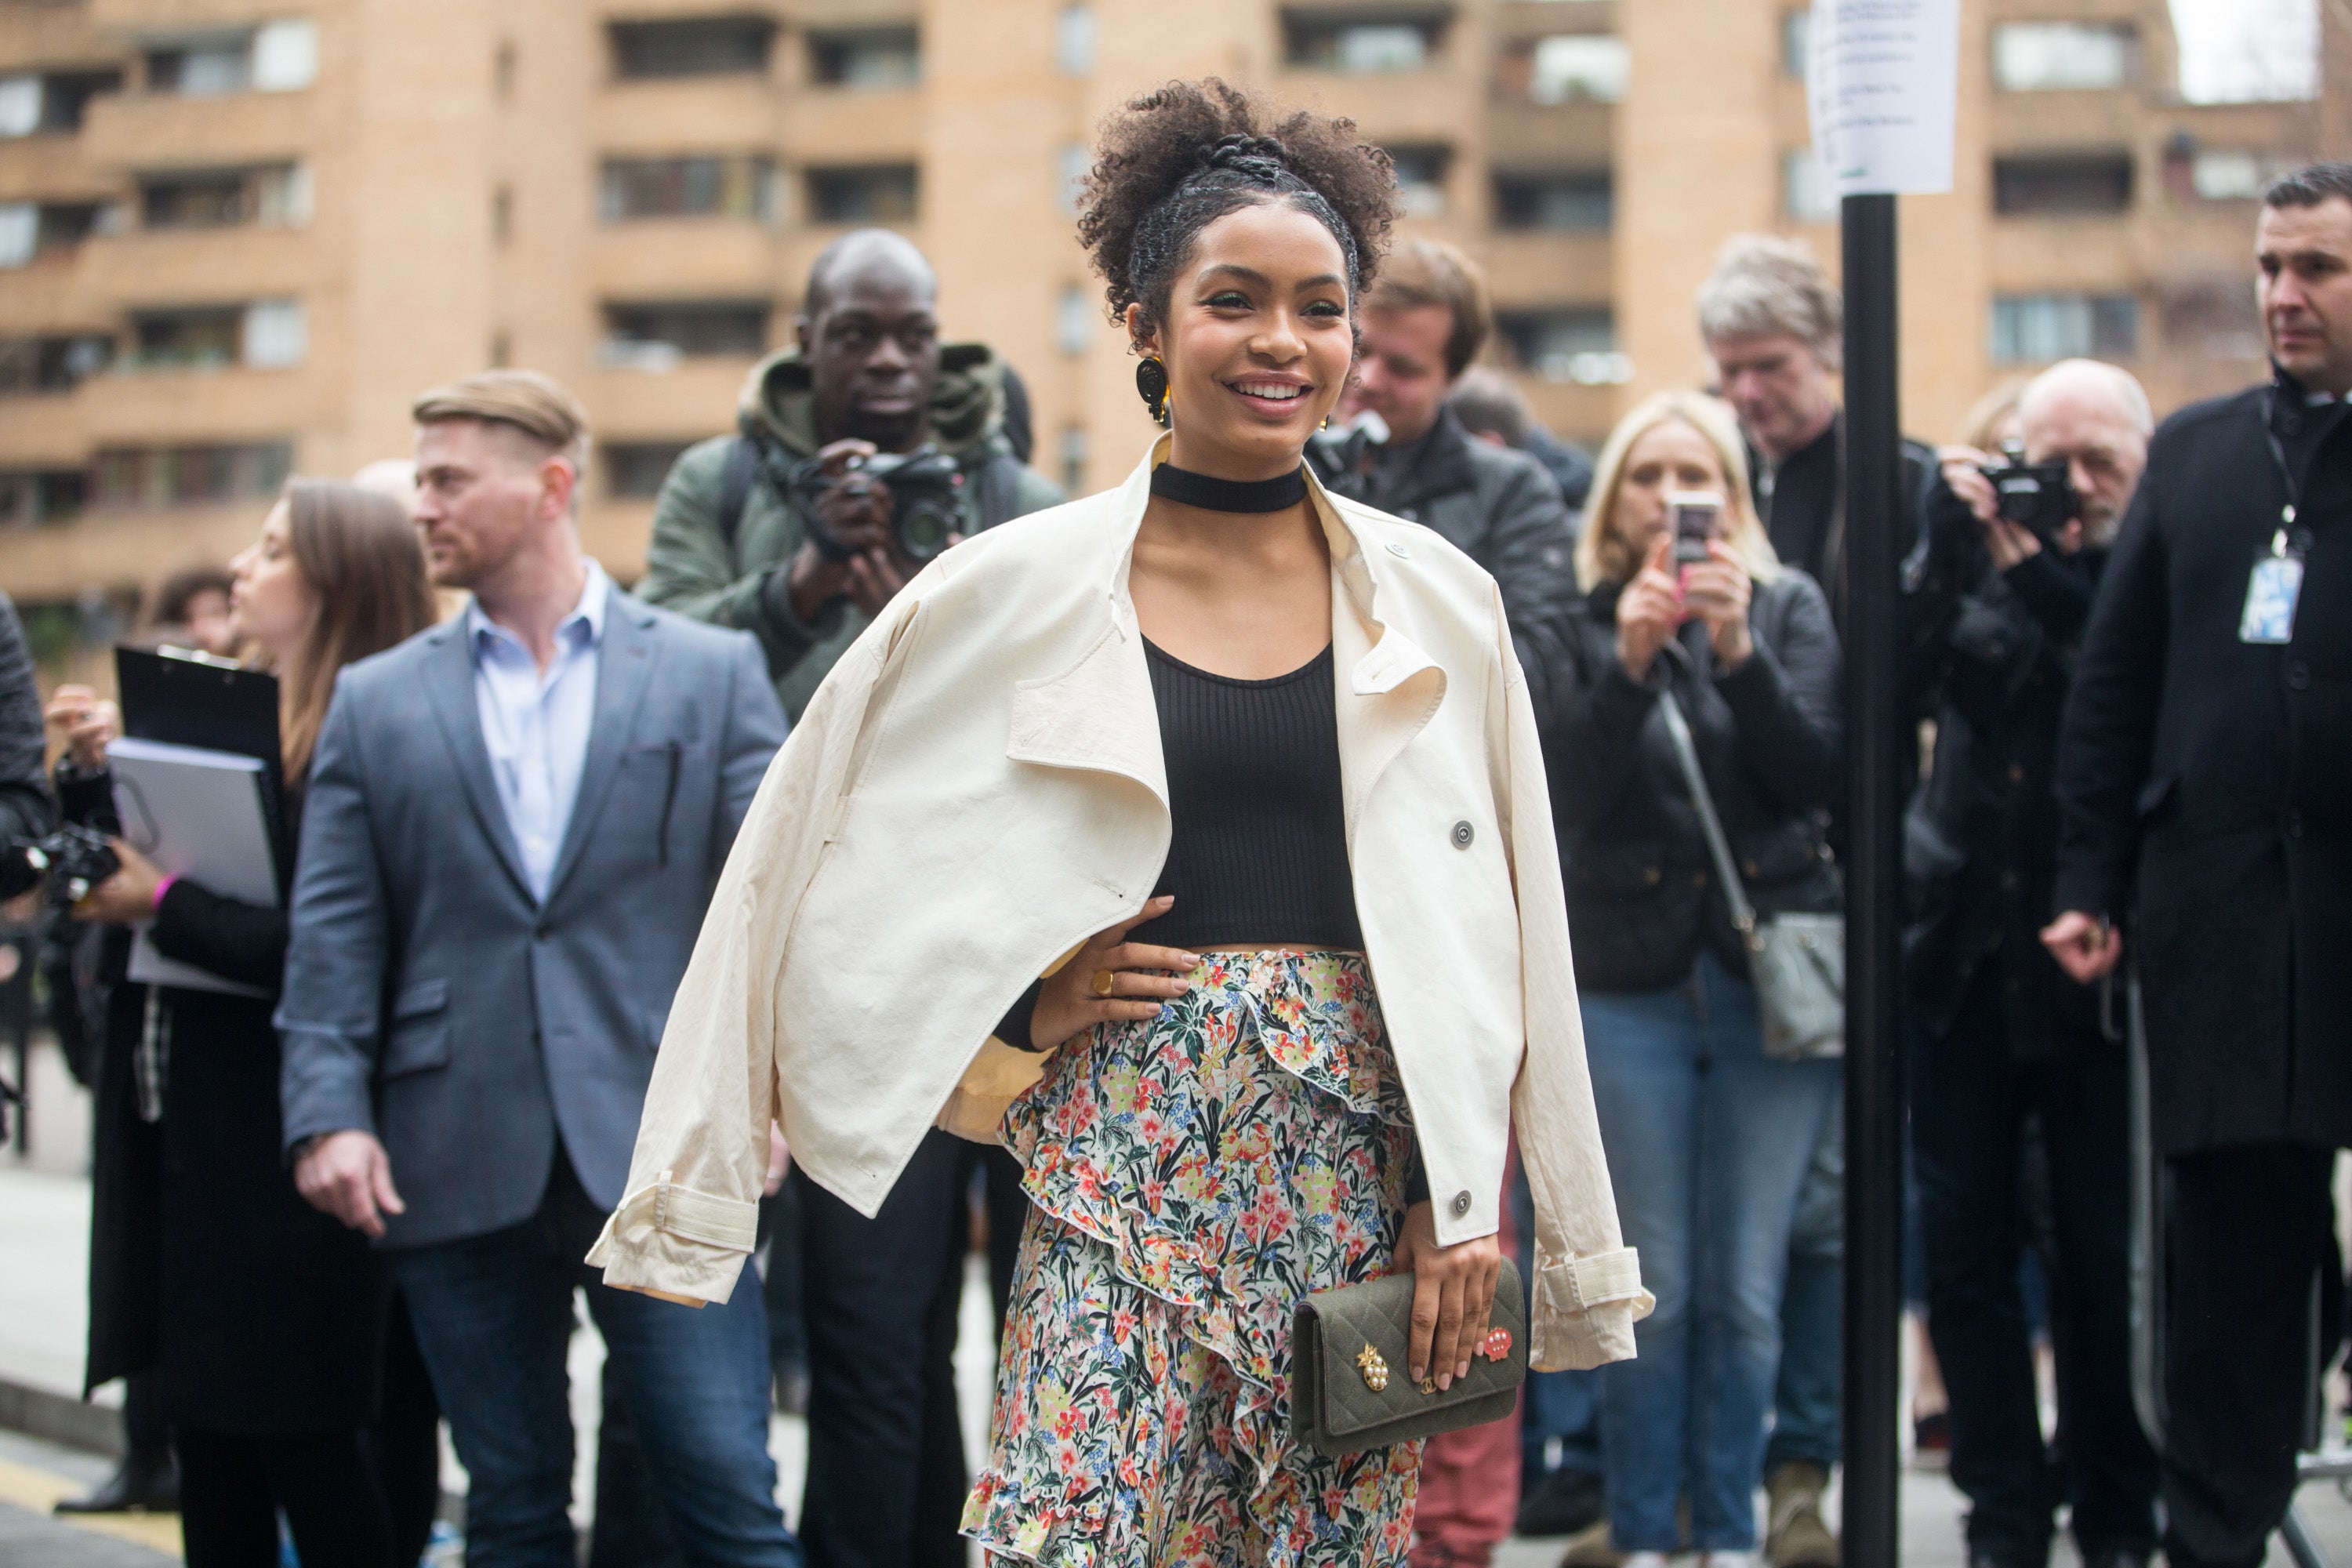 Check Out The Fiercest Street Style Moments From London Fashion Week